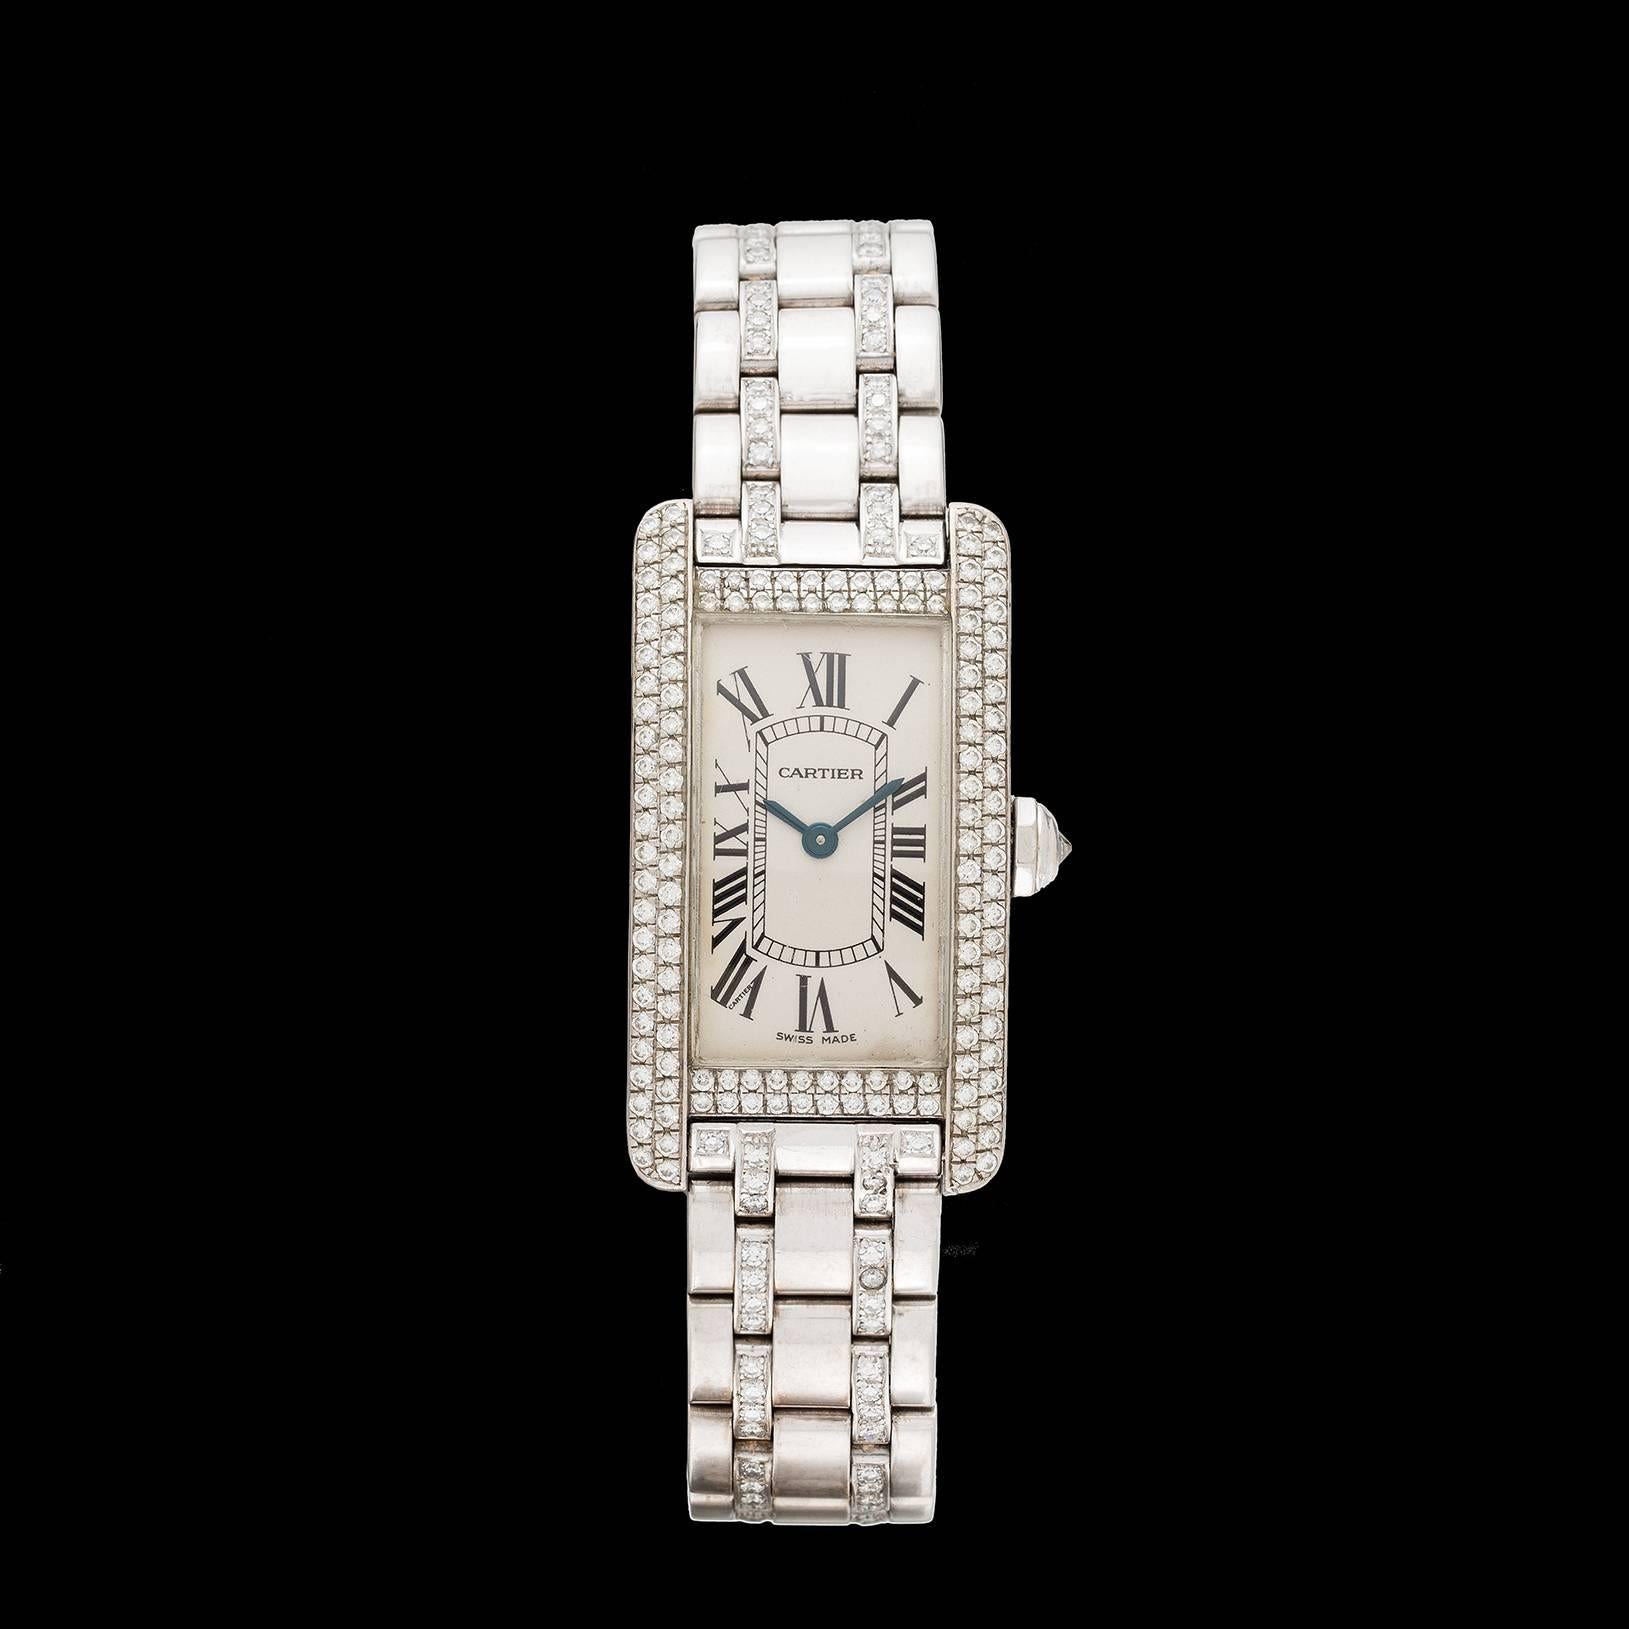 Cartier Tank Américaine automatic watch in 18k white gold with diamond bezel, diamond-set bracelet and deployant clasp. Estimated total diamond weight is 3.26 carats. The case measures 19 x 34mm, and fits a 7 inch wrist. A opulent version of a